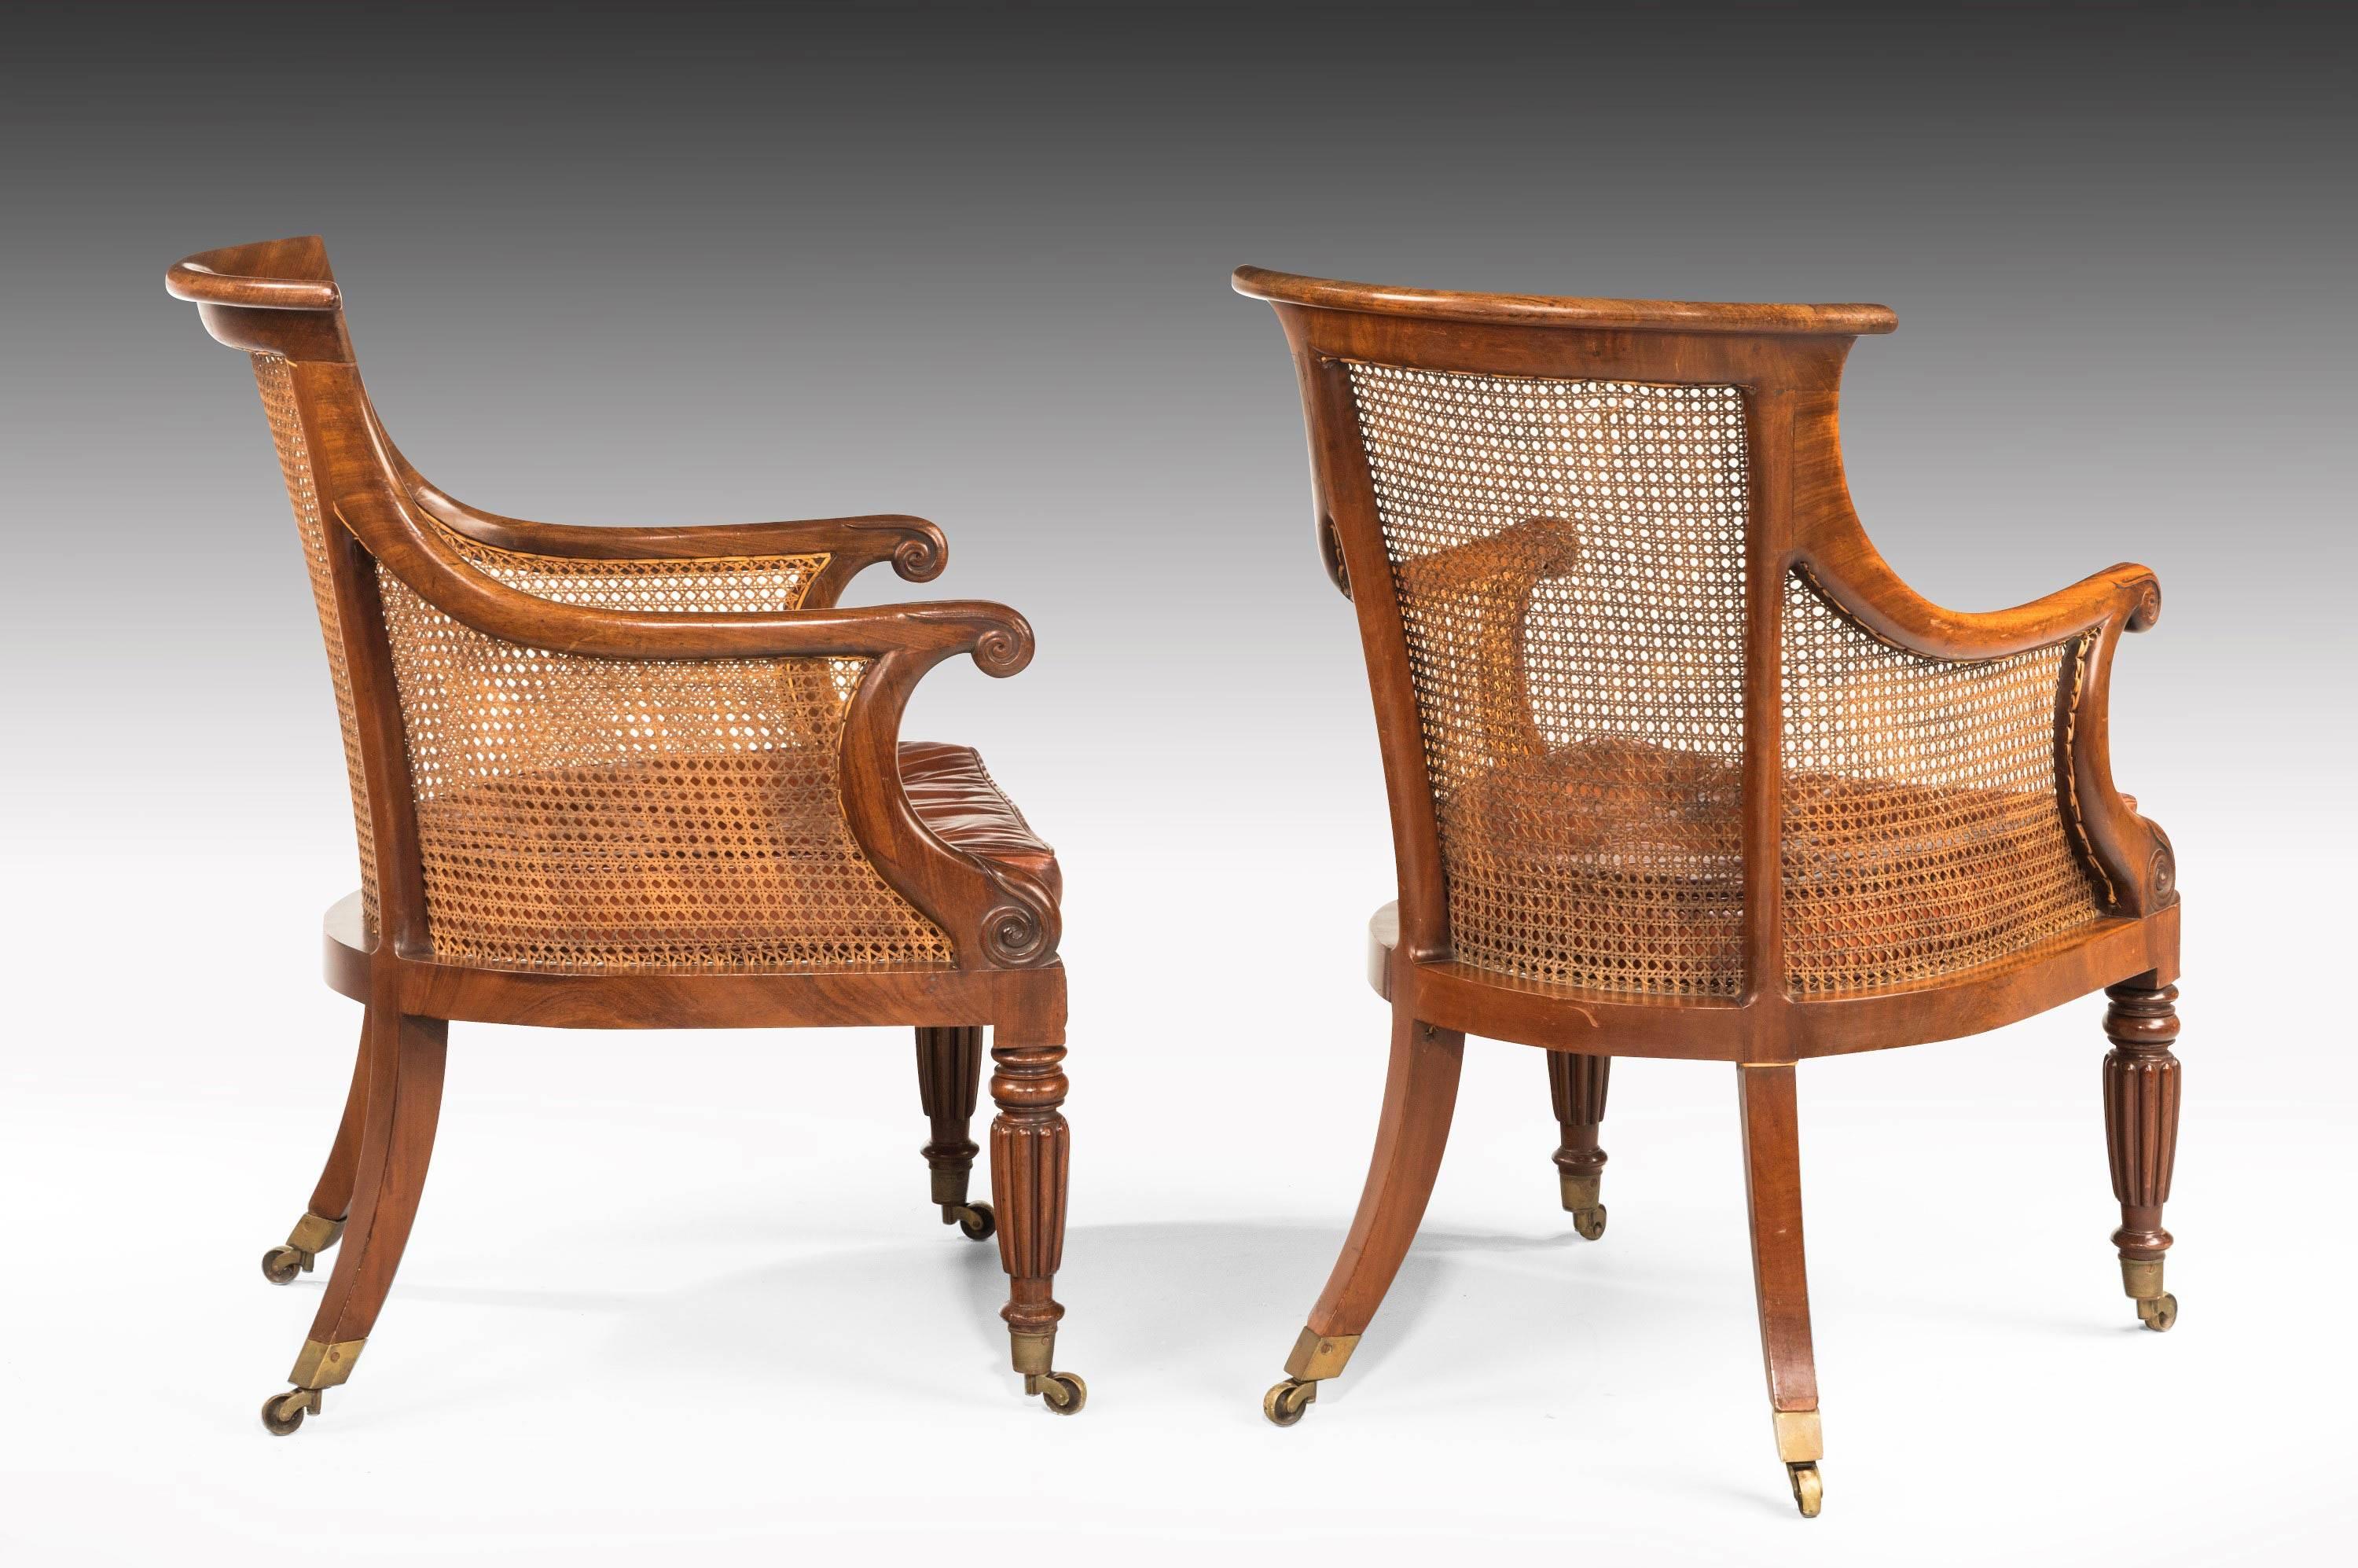 A fine pair of Regency period bergère library chairs. Swept arms over very well carved turned and reeded supports. Original shoes and castors of particularly generous size. Exceptional unrestored condition including the polish.

Measure: Seat